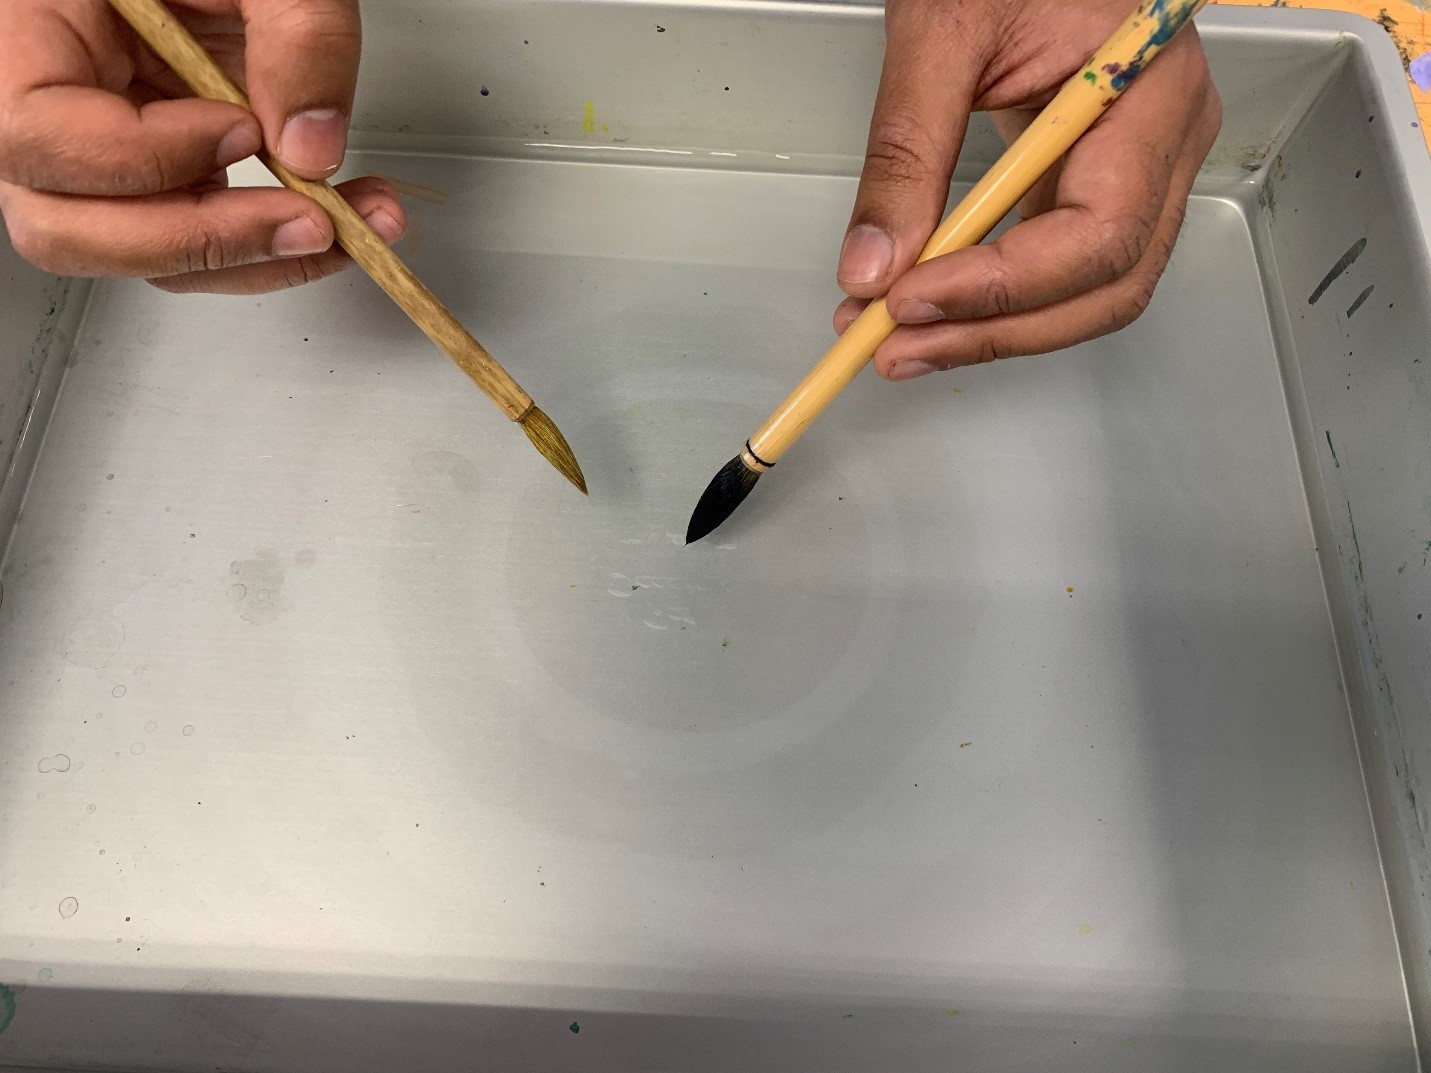 two hands holding two calligraphy brushes dipping one into the water resulting in a round ink shape